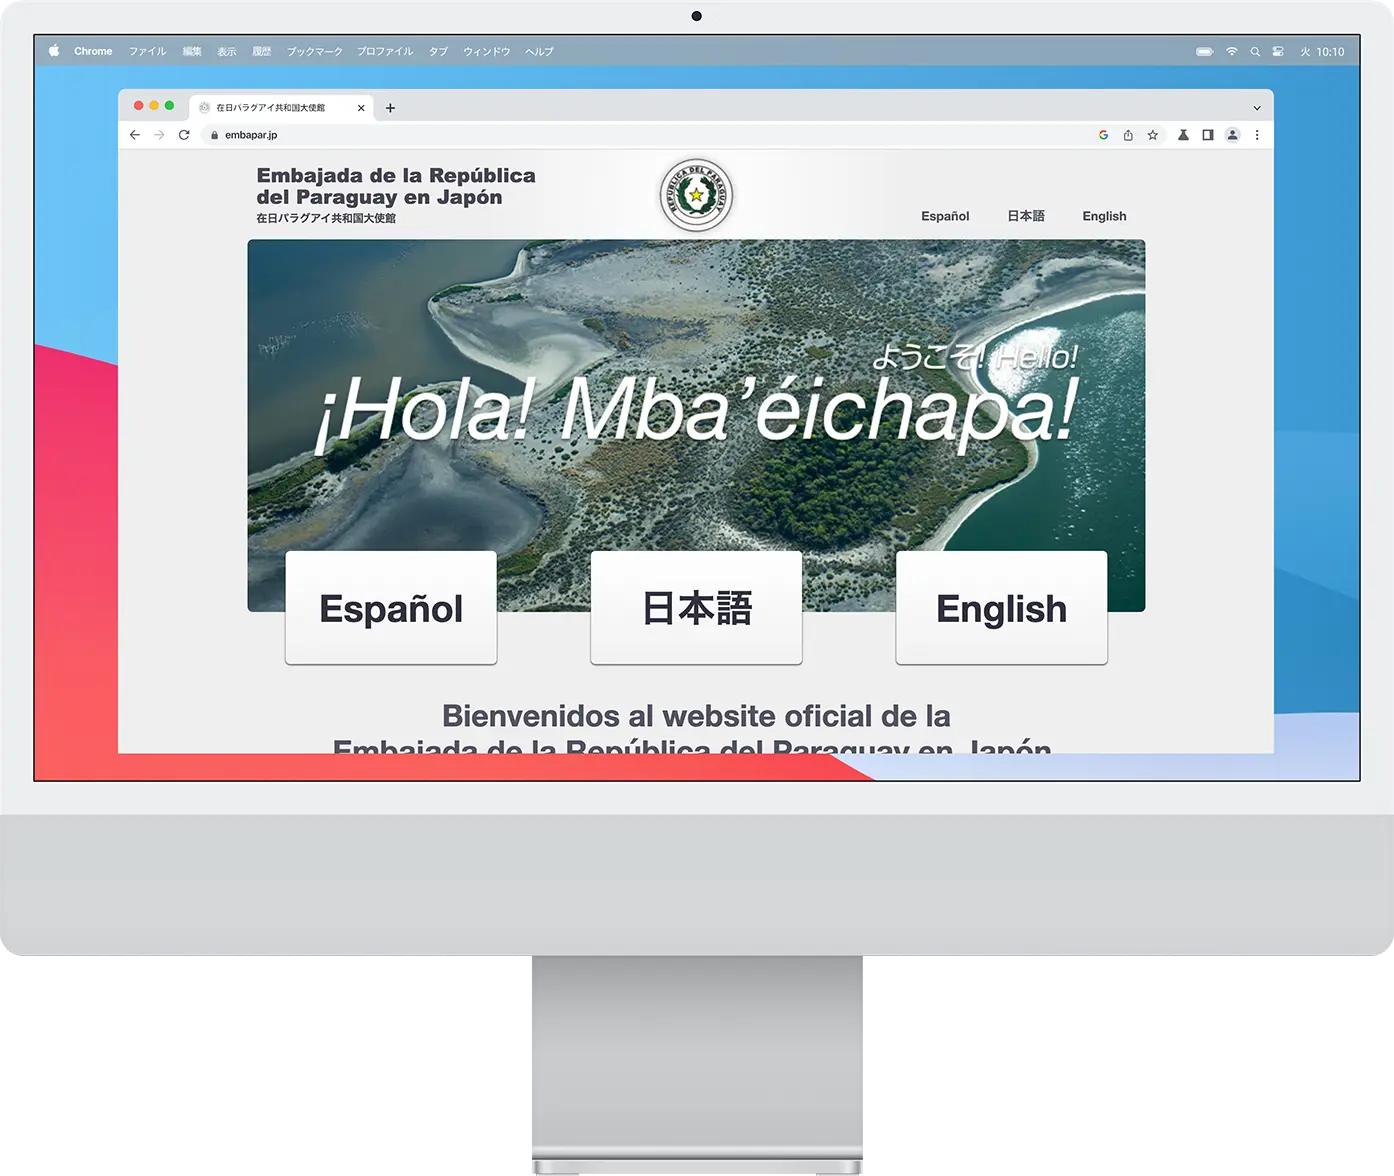 Embassy of the Republic of Paraguay in Japan - Splash Page